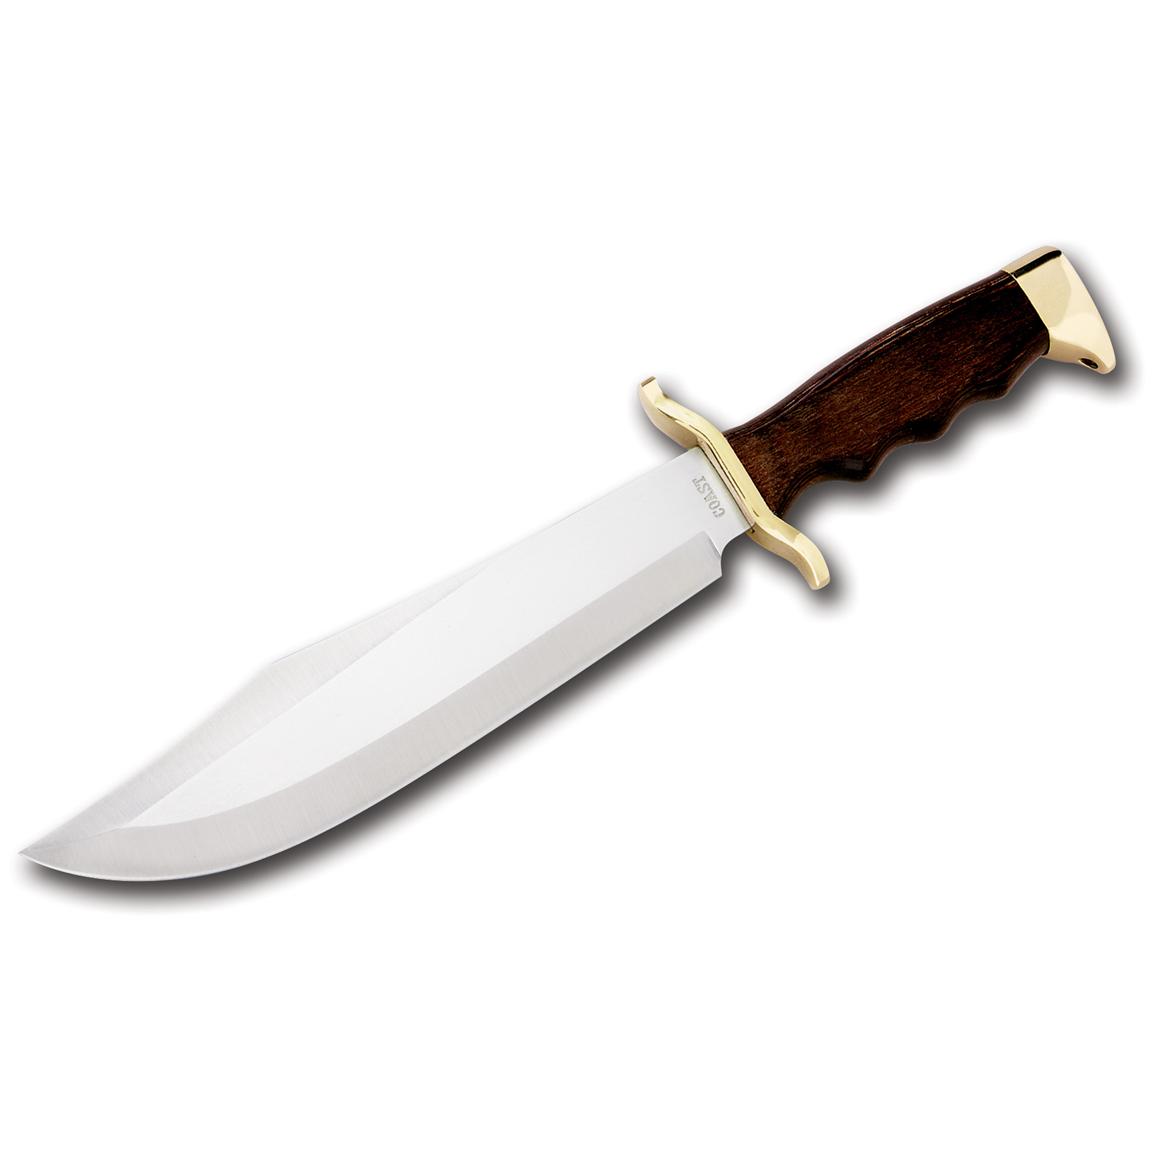 Bowie knife clipart